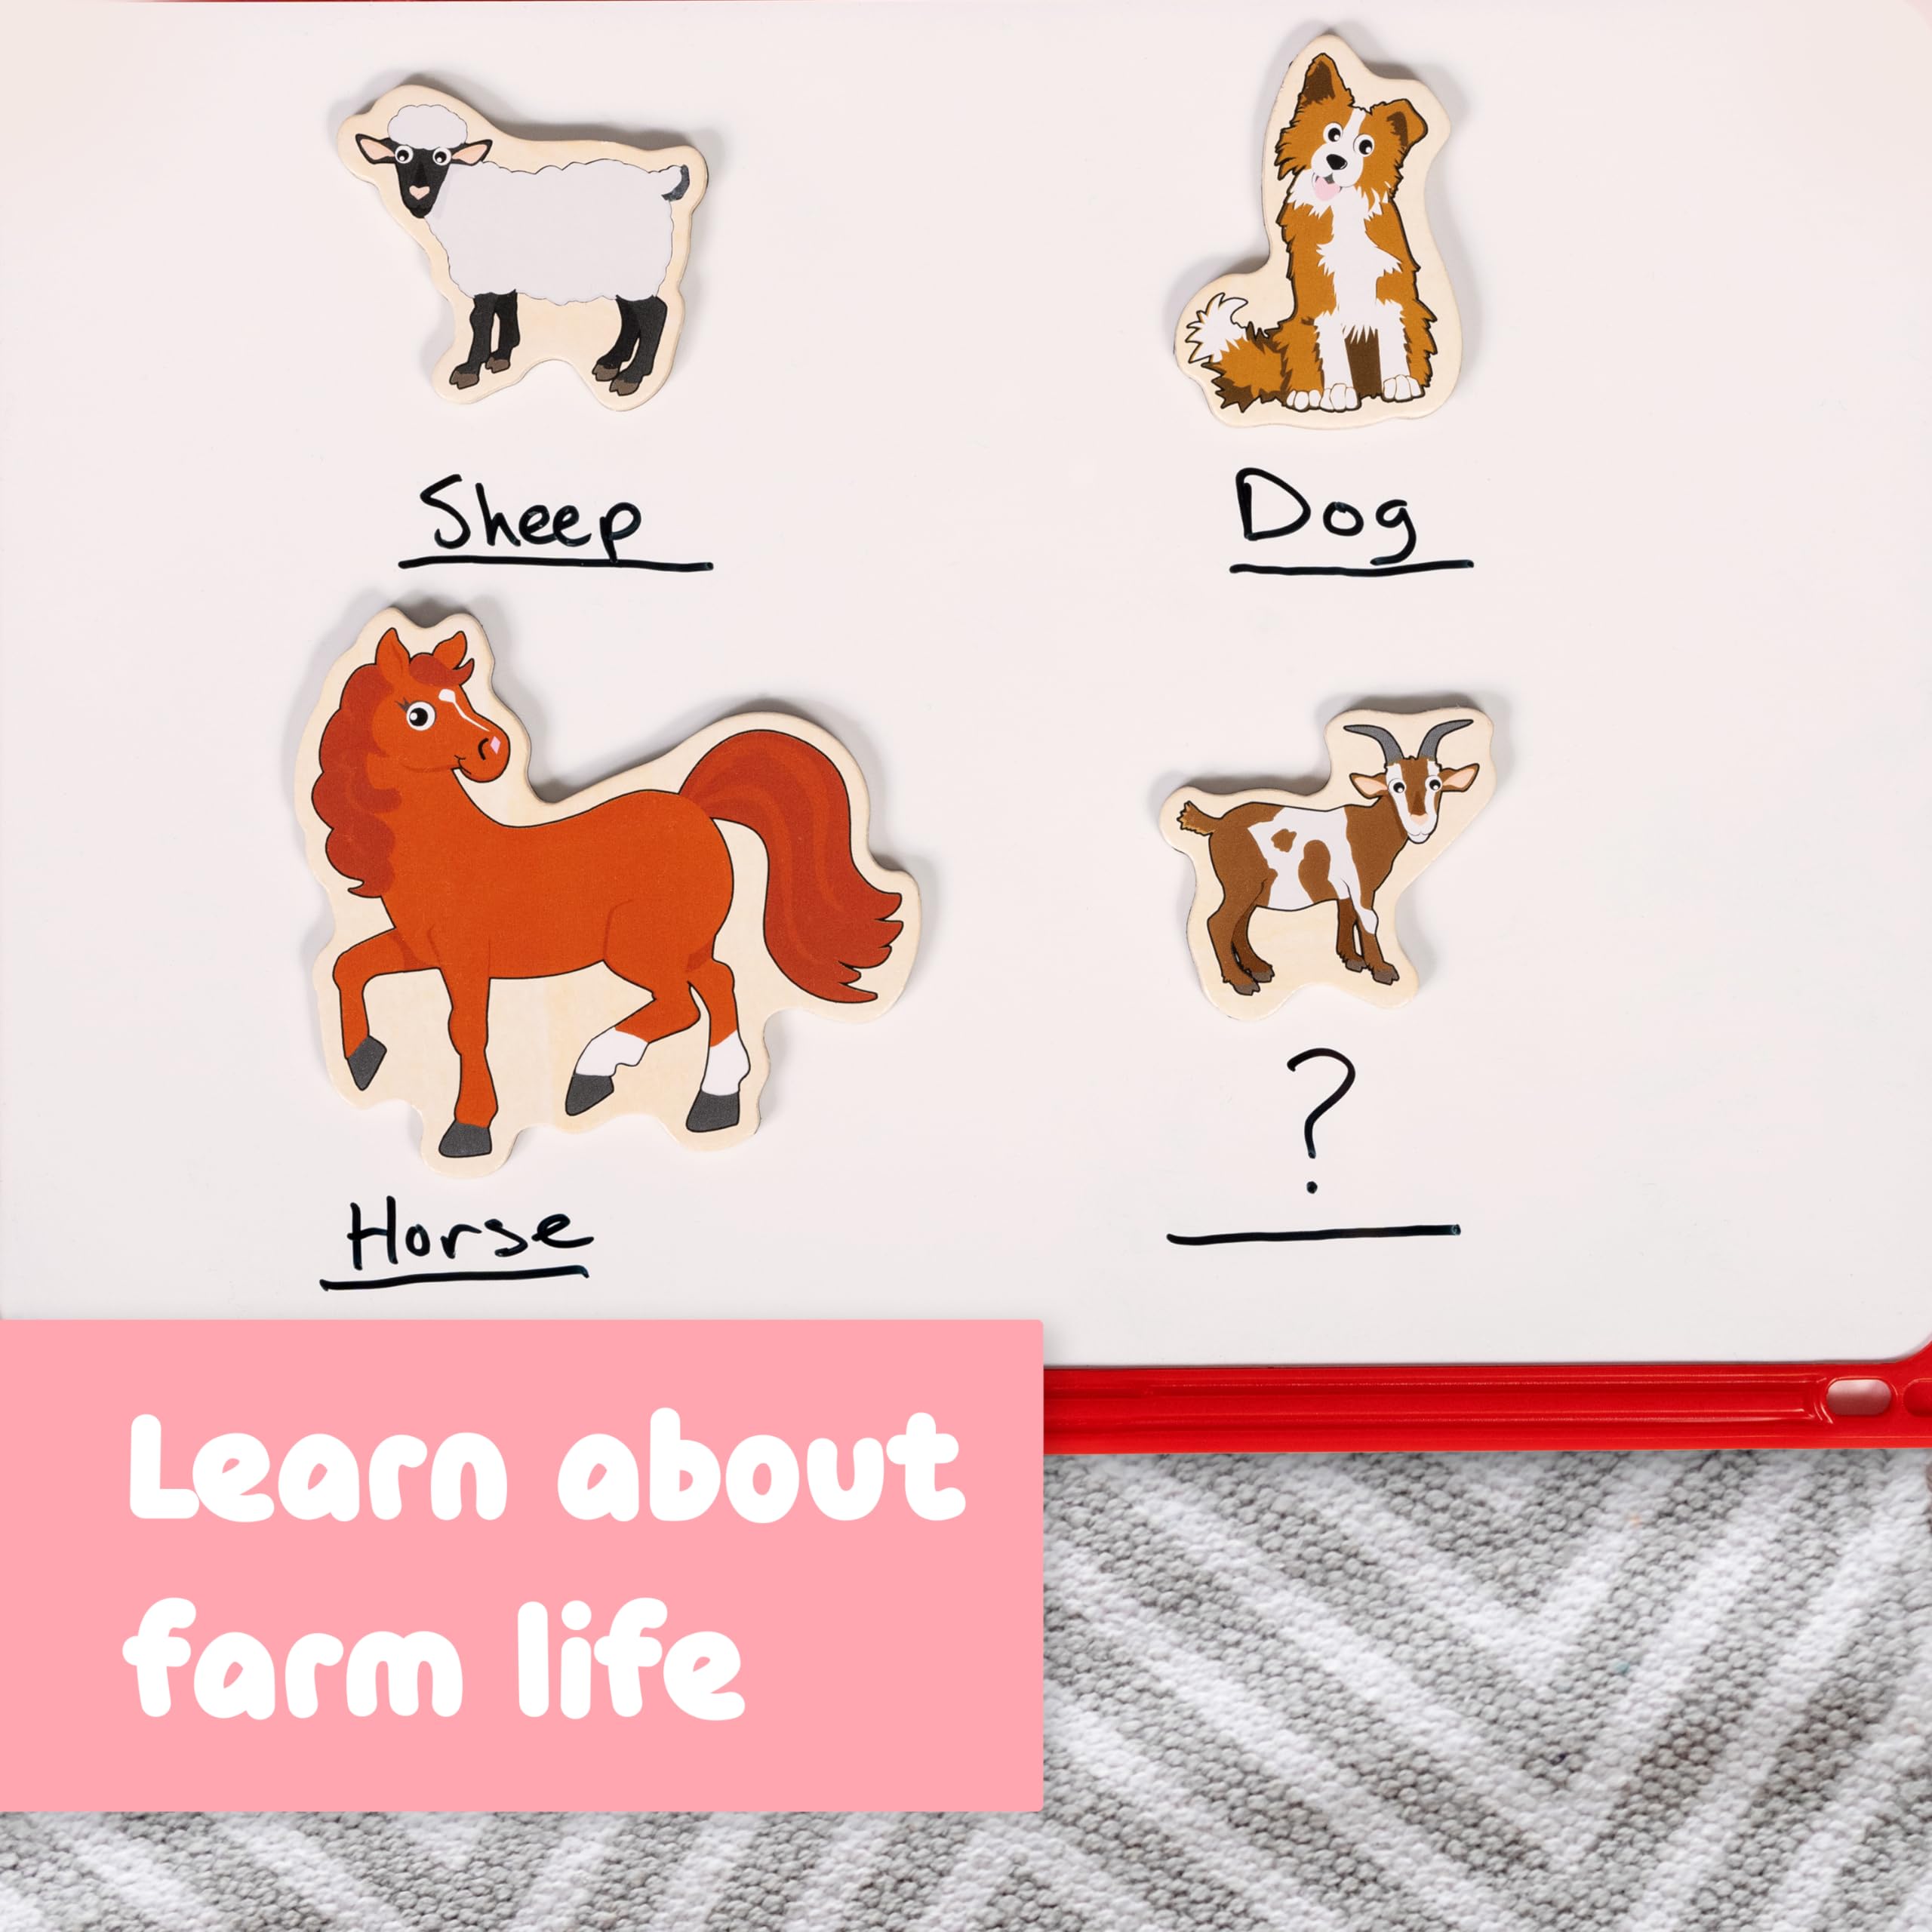 SPARK & WOW Wooden Magnets - Farm - Set of 20 - Magnets for Kids Ages 2+ - Cute Farm Magnets for Fridges, Whiteboards and More